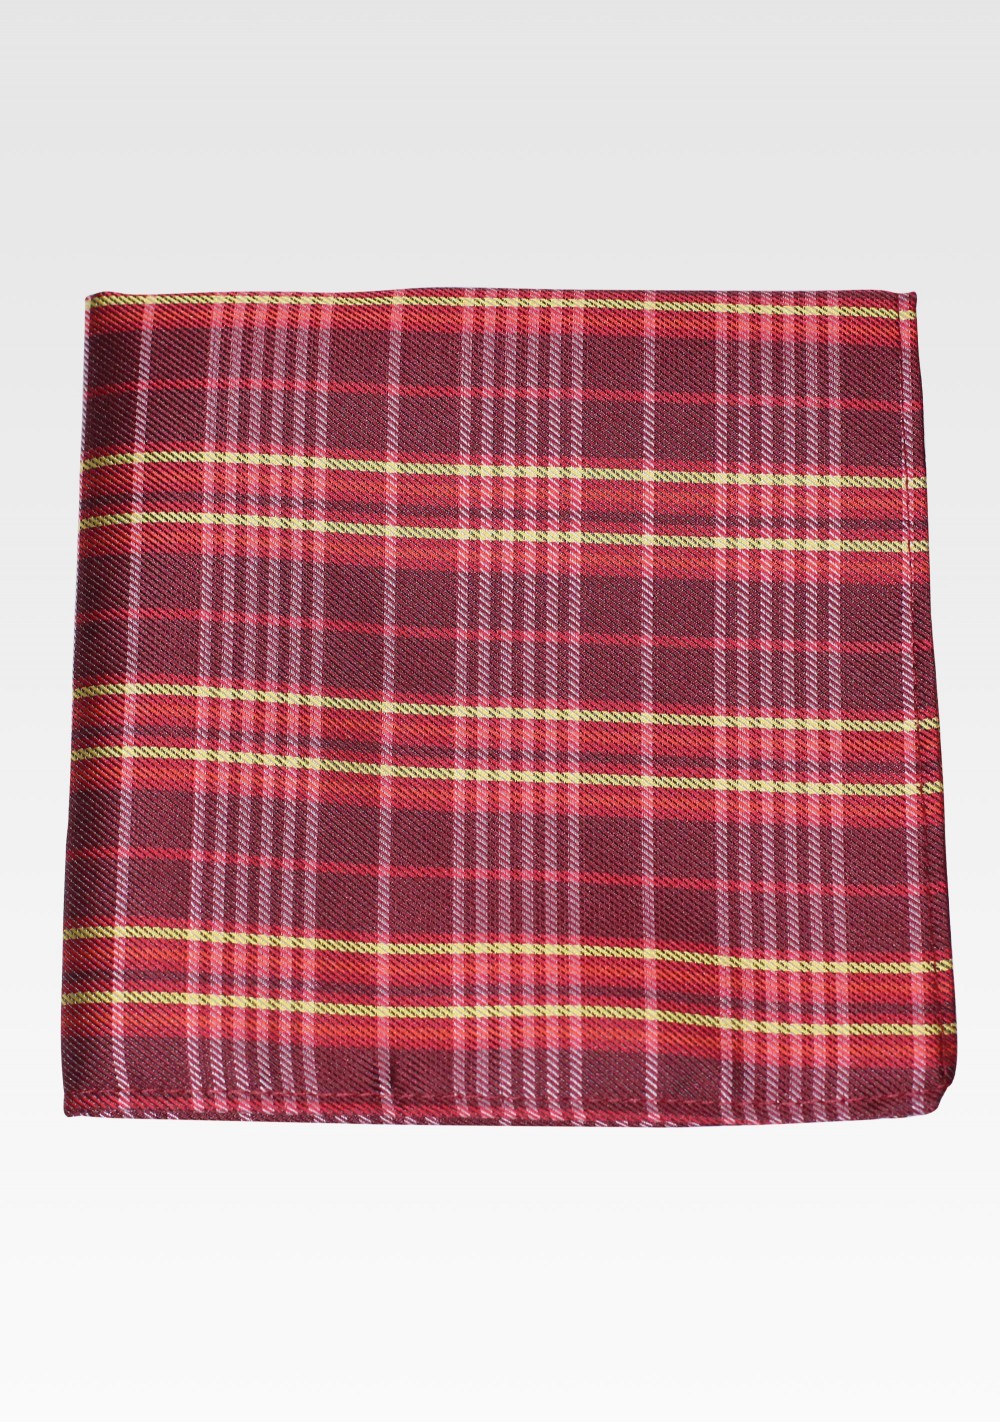 Tartan Check Hanky in Cherry and Gold